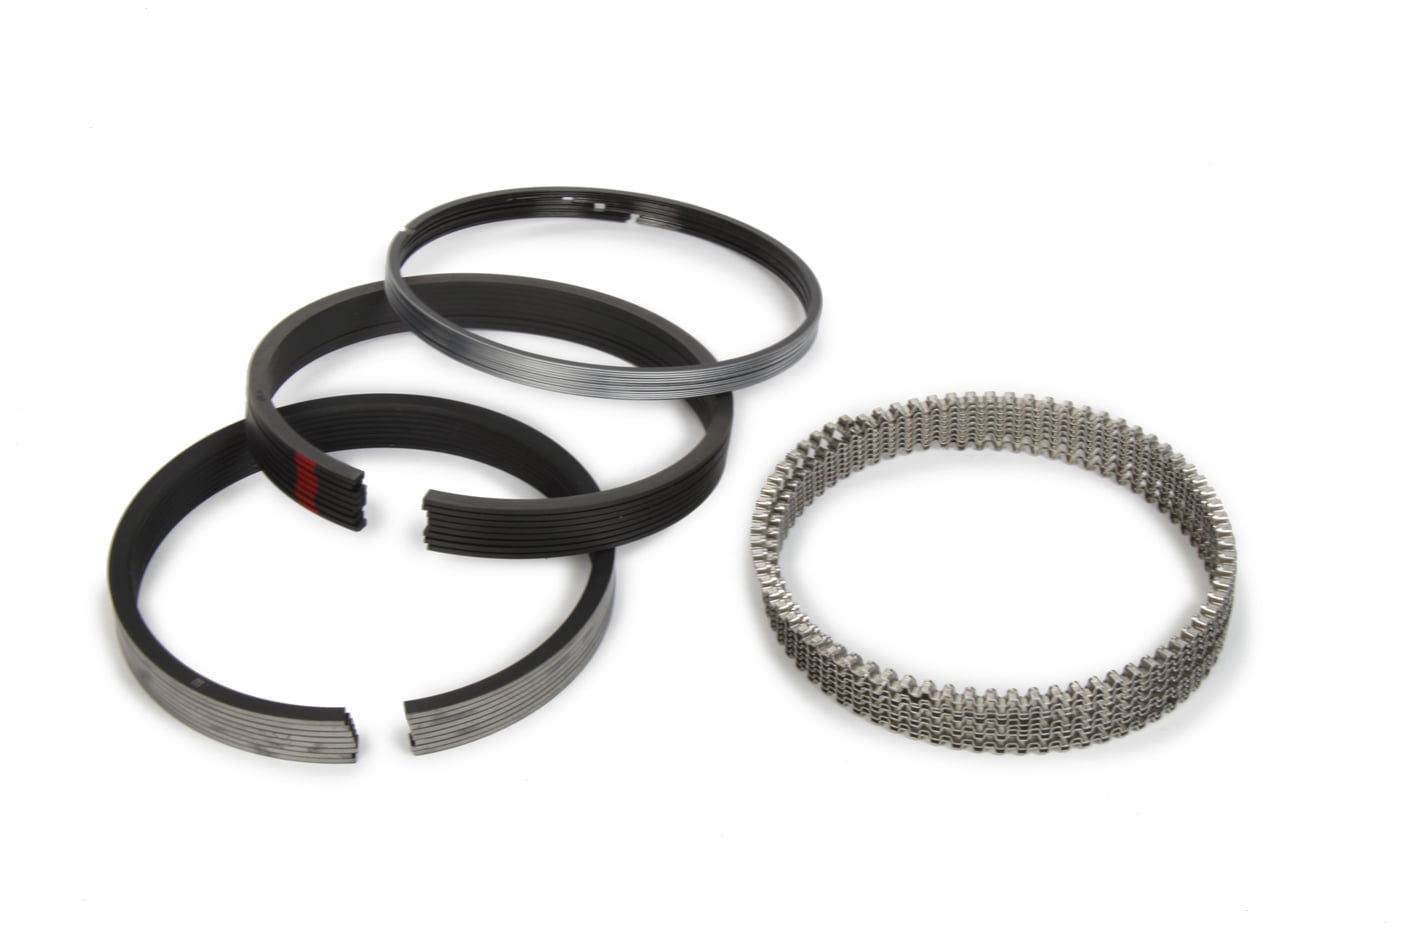 4.040 in Bore 1.5 x 1.5 x 3.0 mm Thick Standard Tension Piston Rings Plasma Moly Kit 8 Cylinder